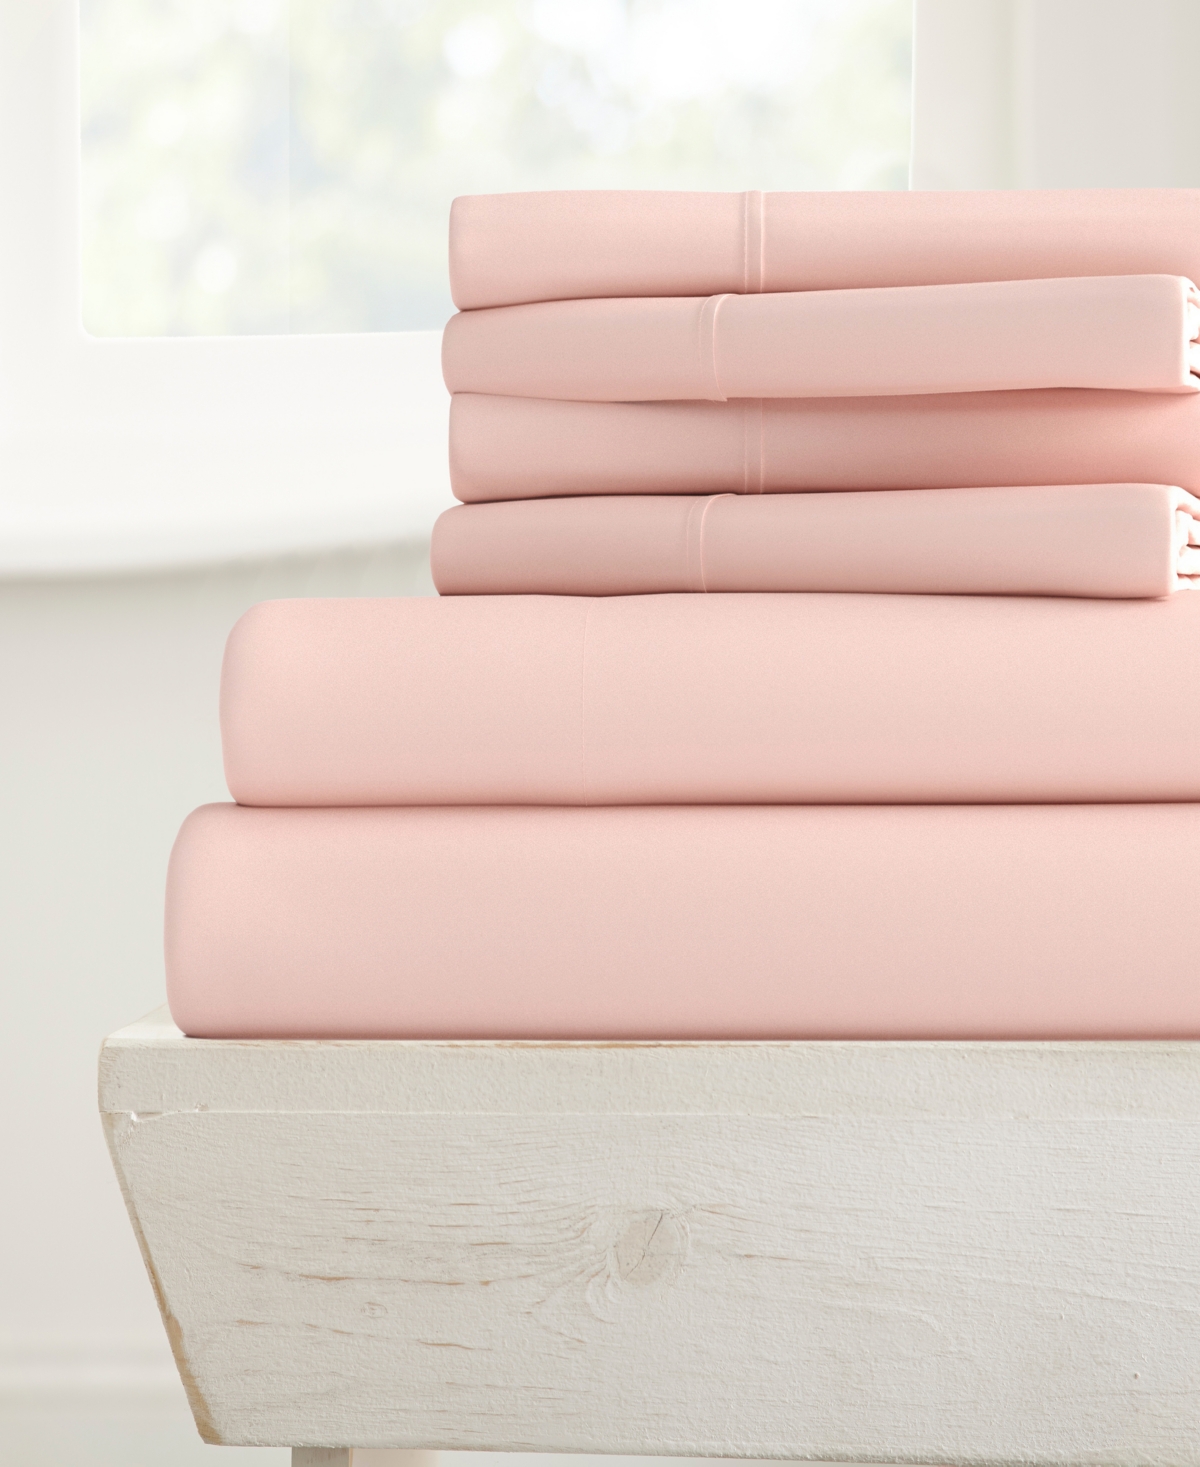 Ienjoy Home Solids In Style By The Home Collection 6 Piece Bed Sheet Set, Queen Bedding In Blush